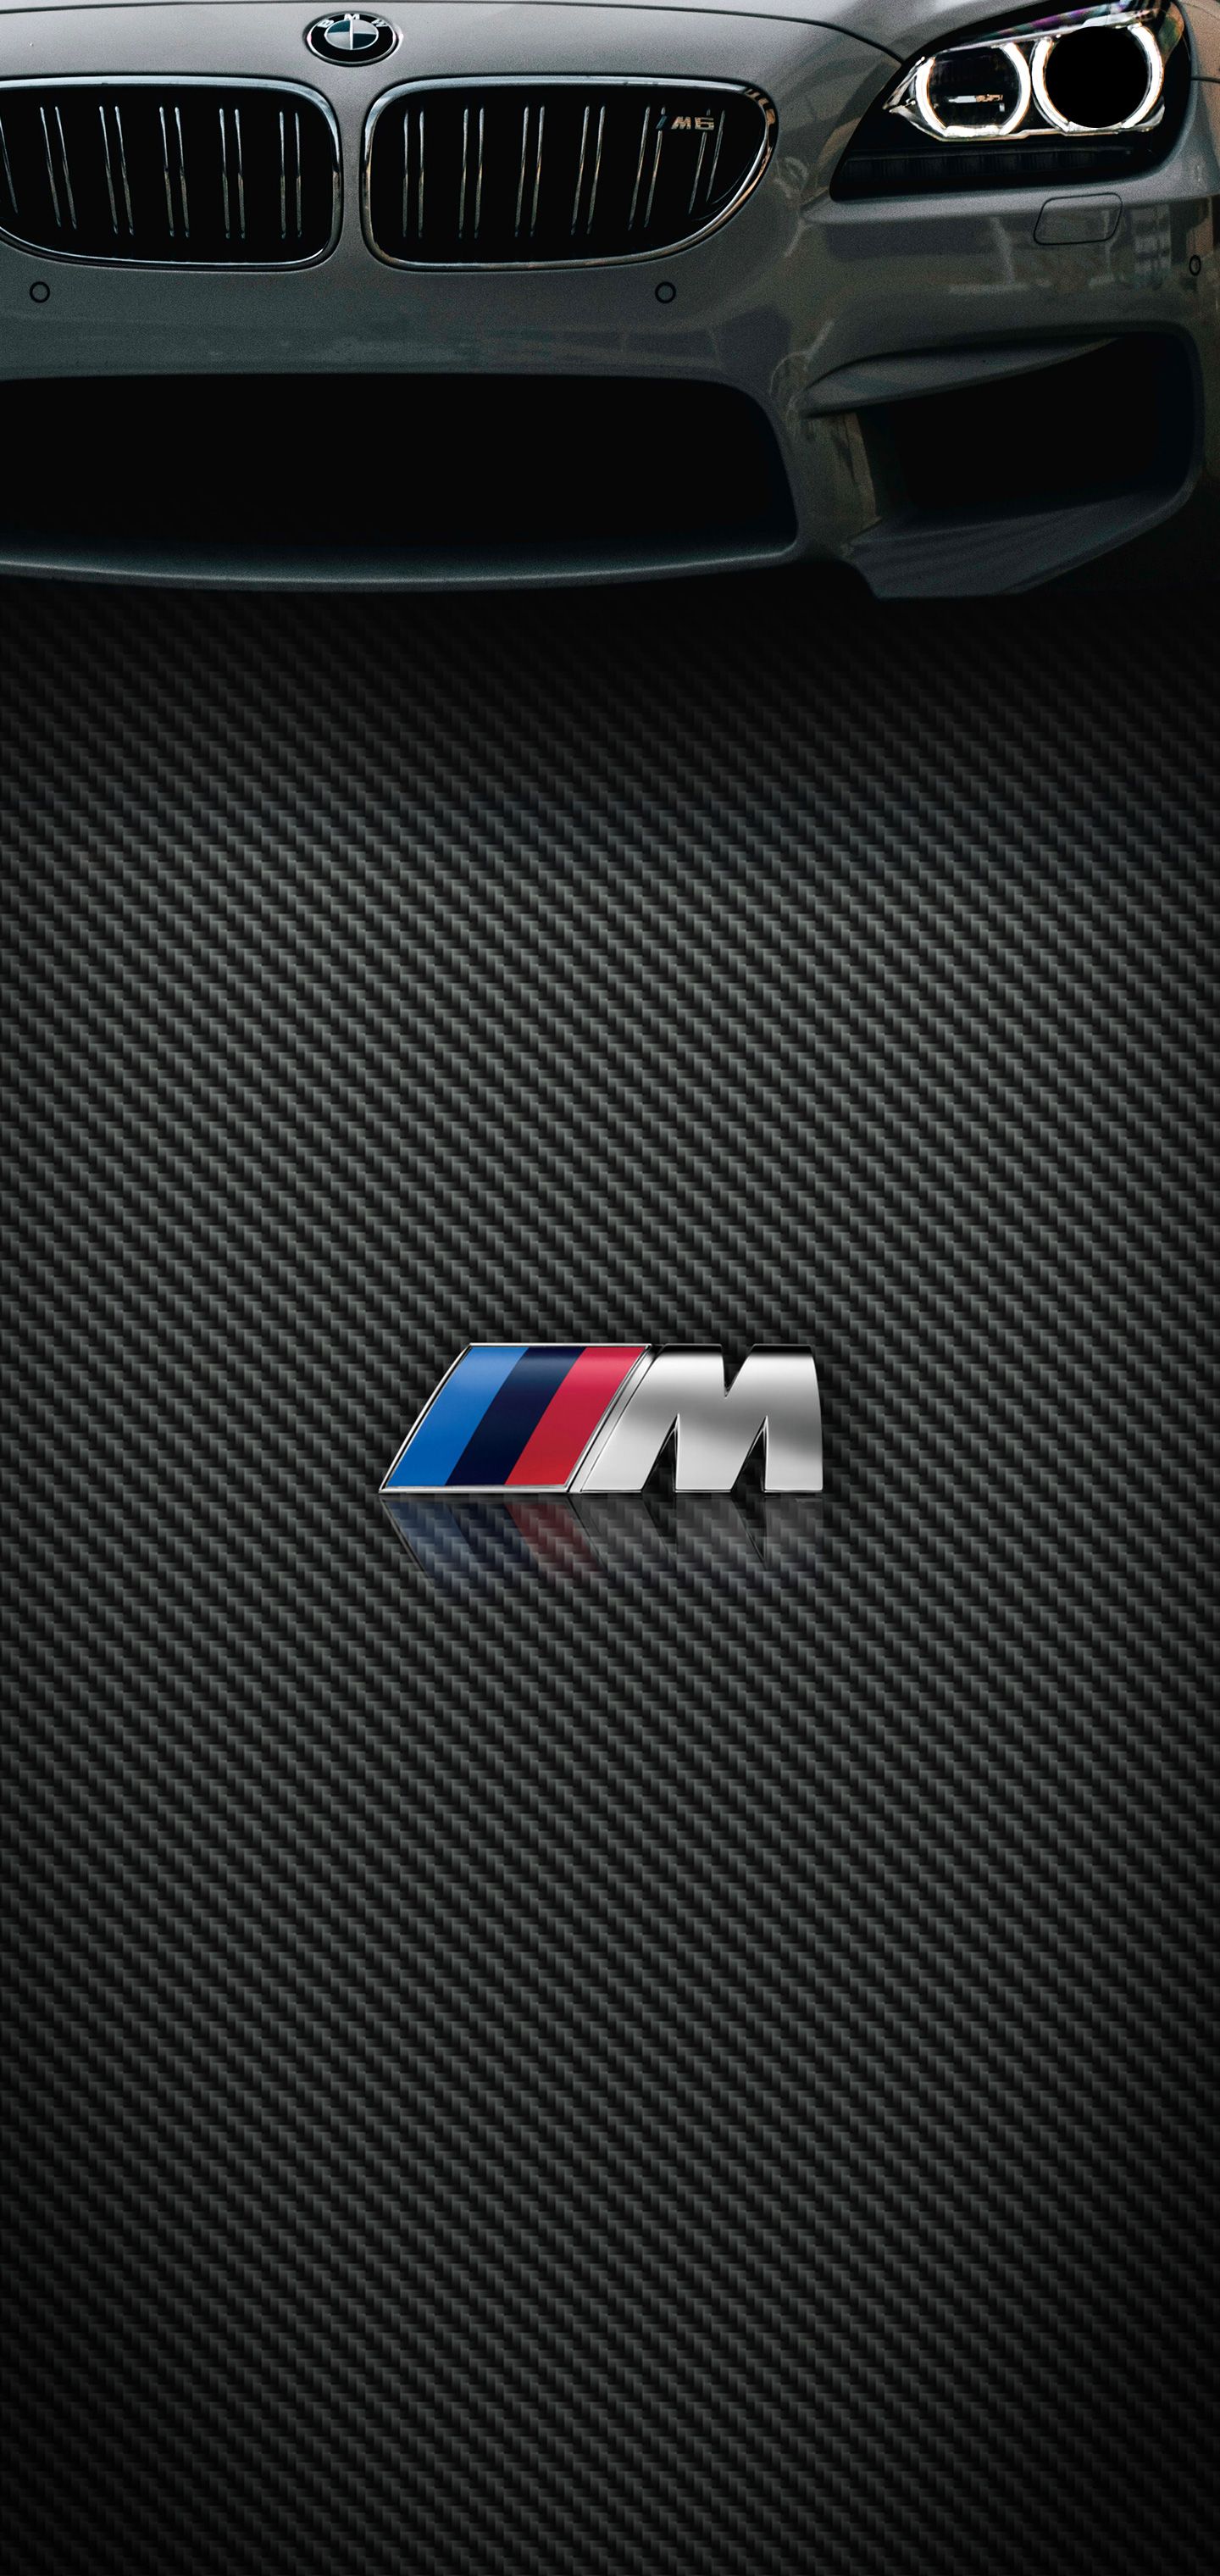 BMW M Power By OwThatHertz Galaxy S10 Hole Punch Wallpaper